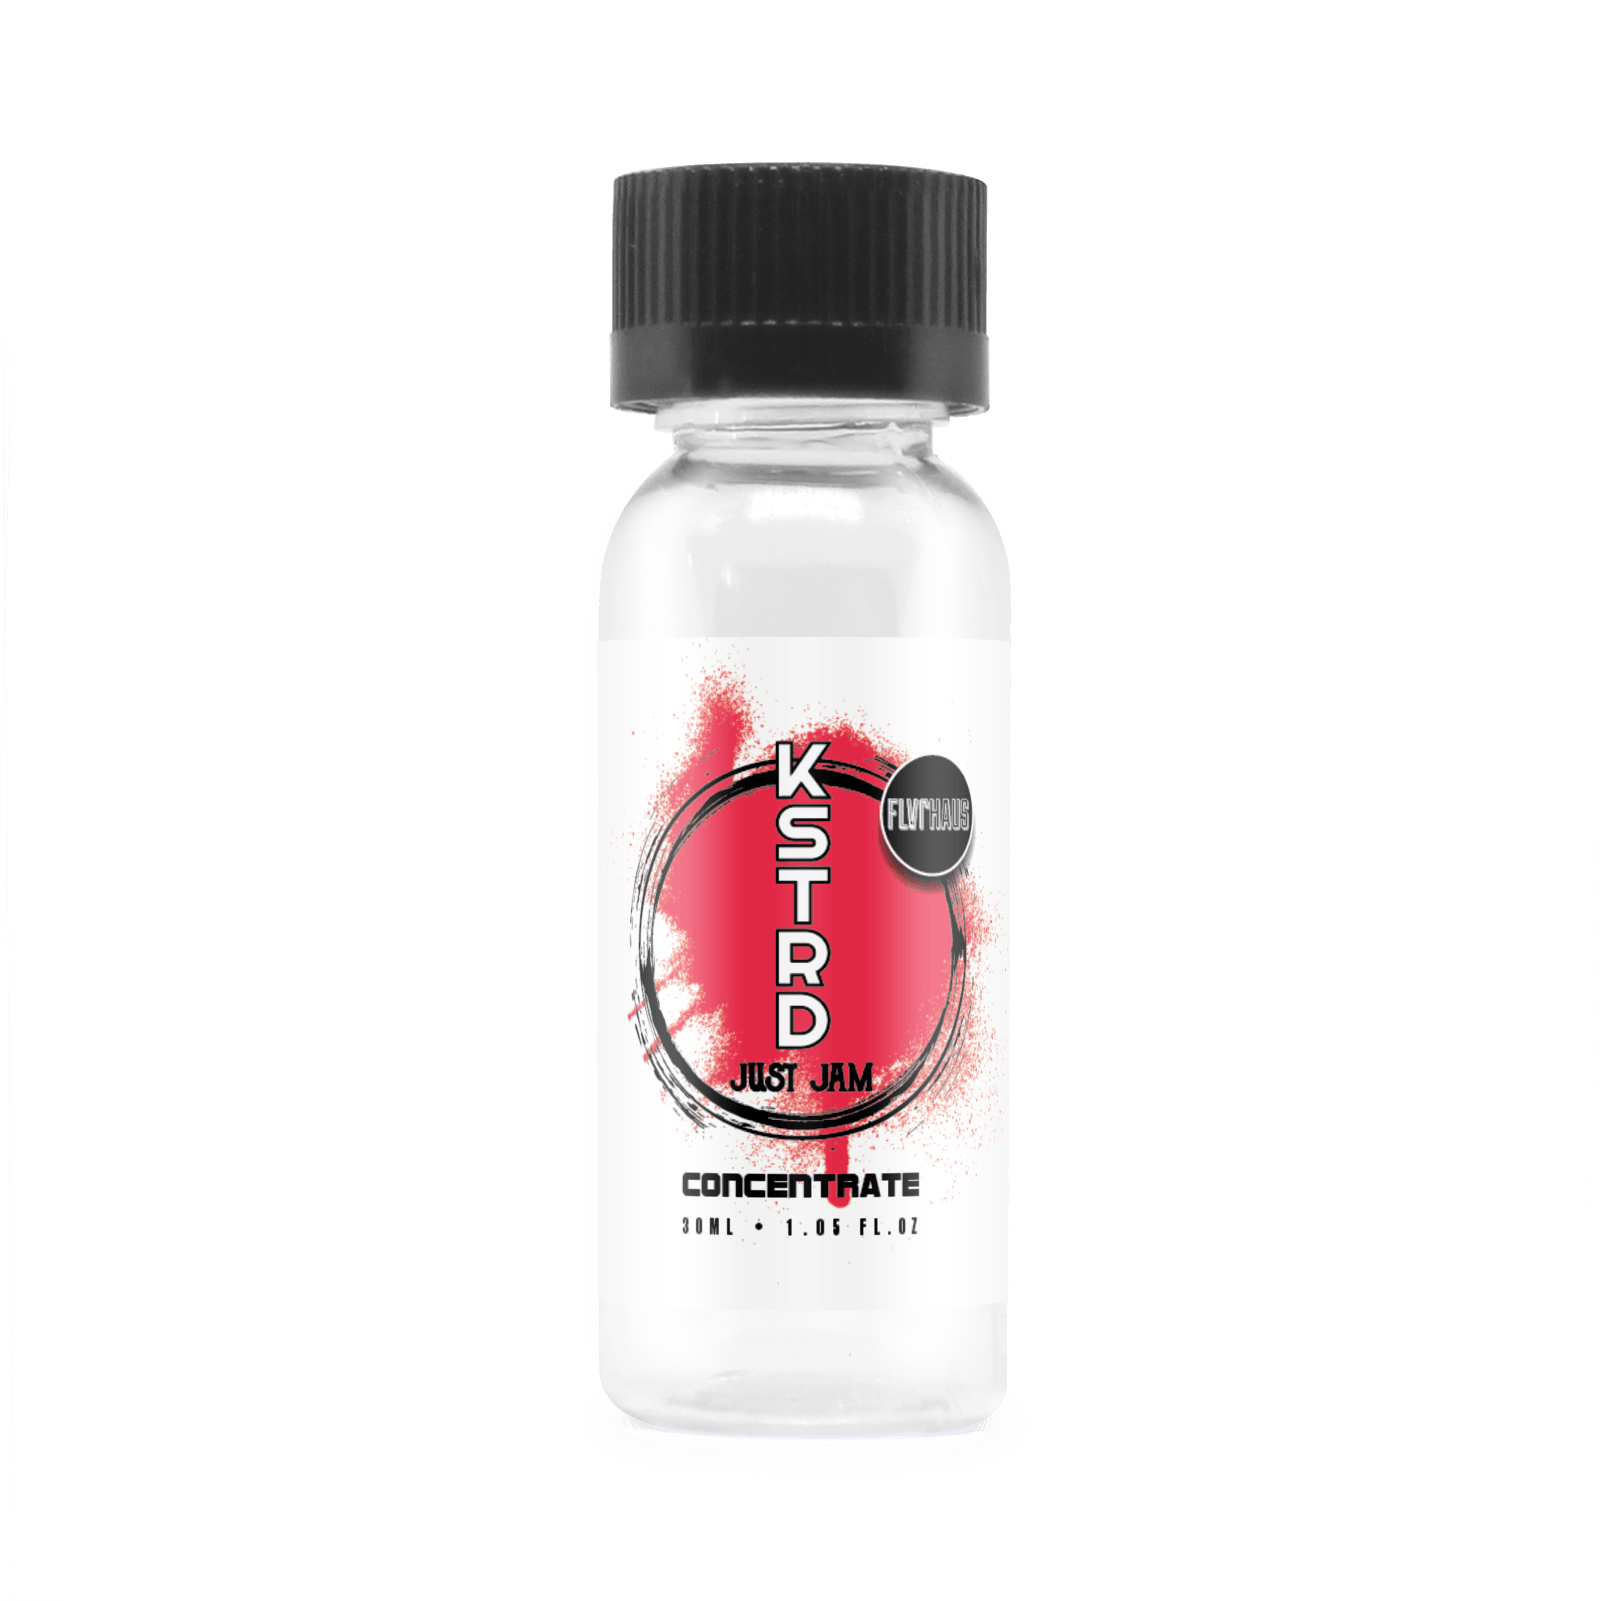 KSTRD - Just Jam 30ml Concentrate by FLVRHAUS - The Ace Of Vapez